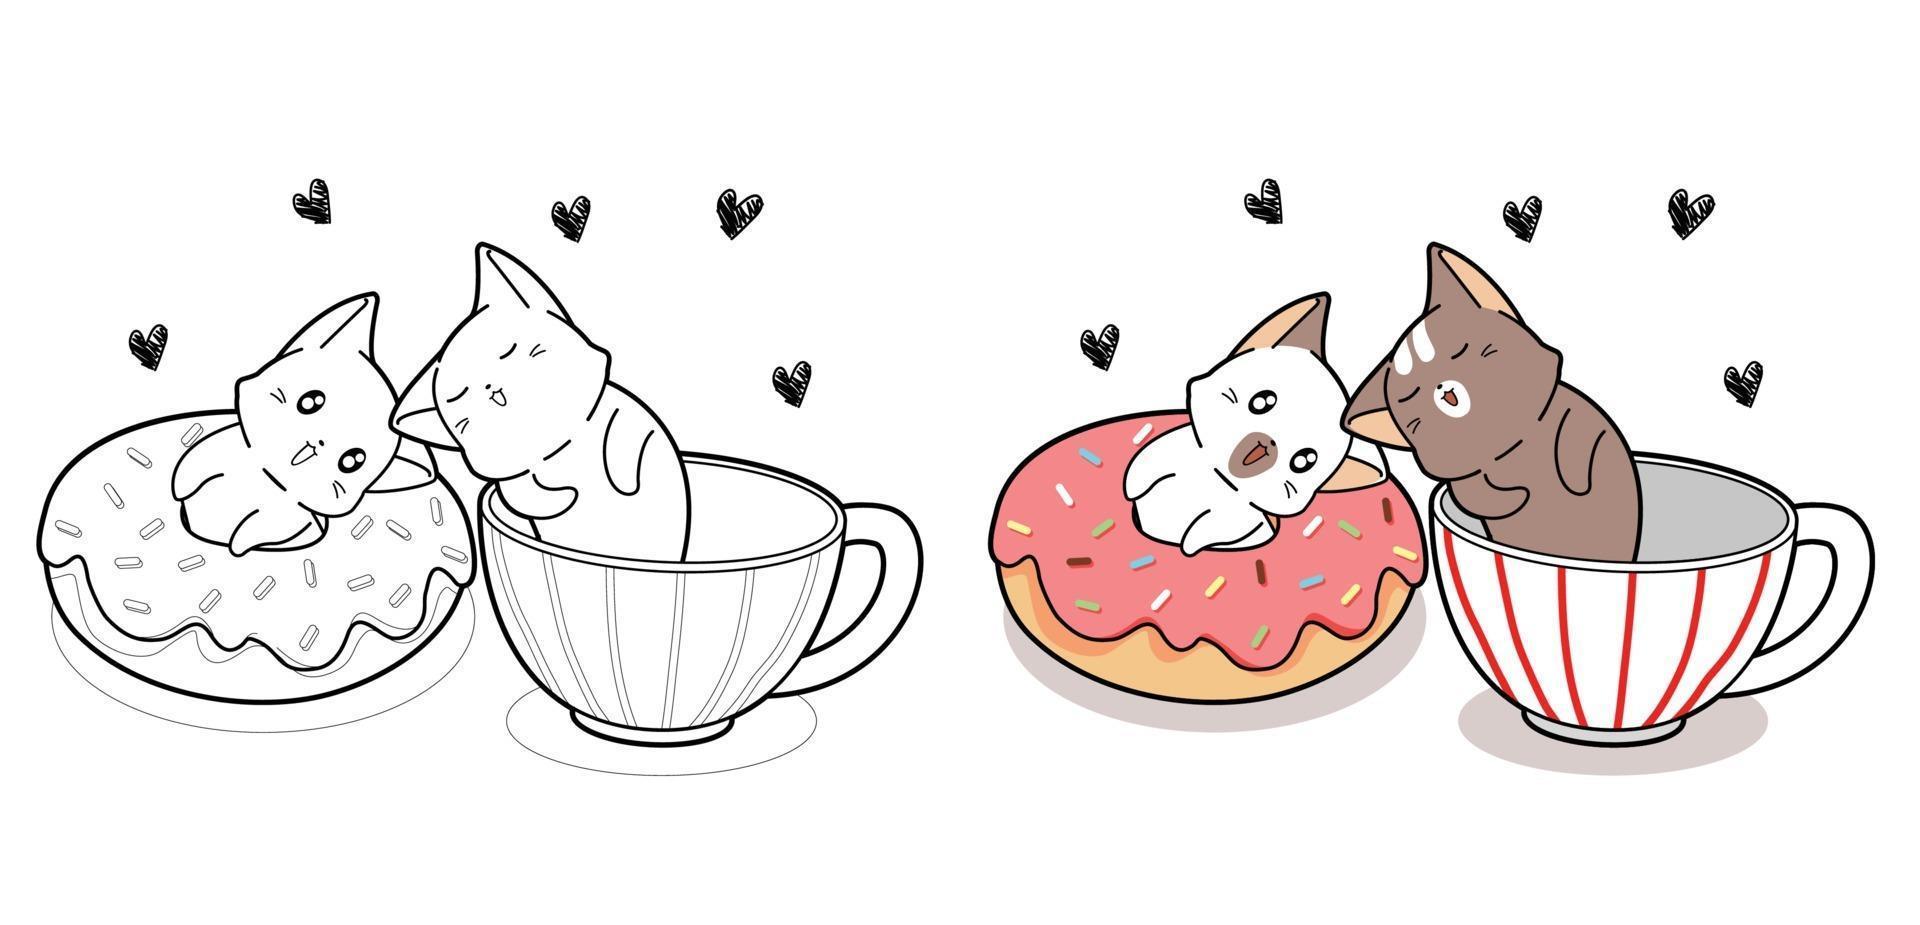 Couple cute cat with donut and cup of coffee cartoon coloring page vector